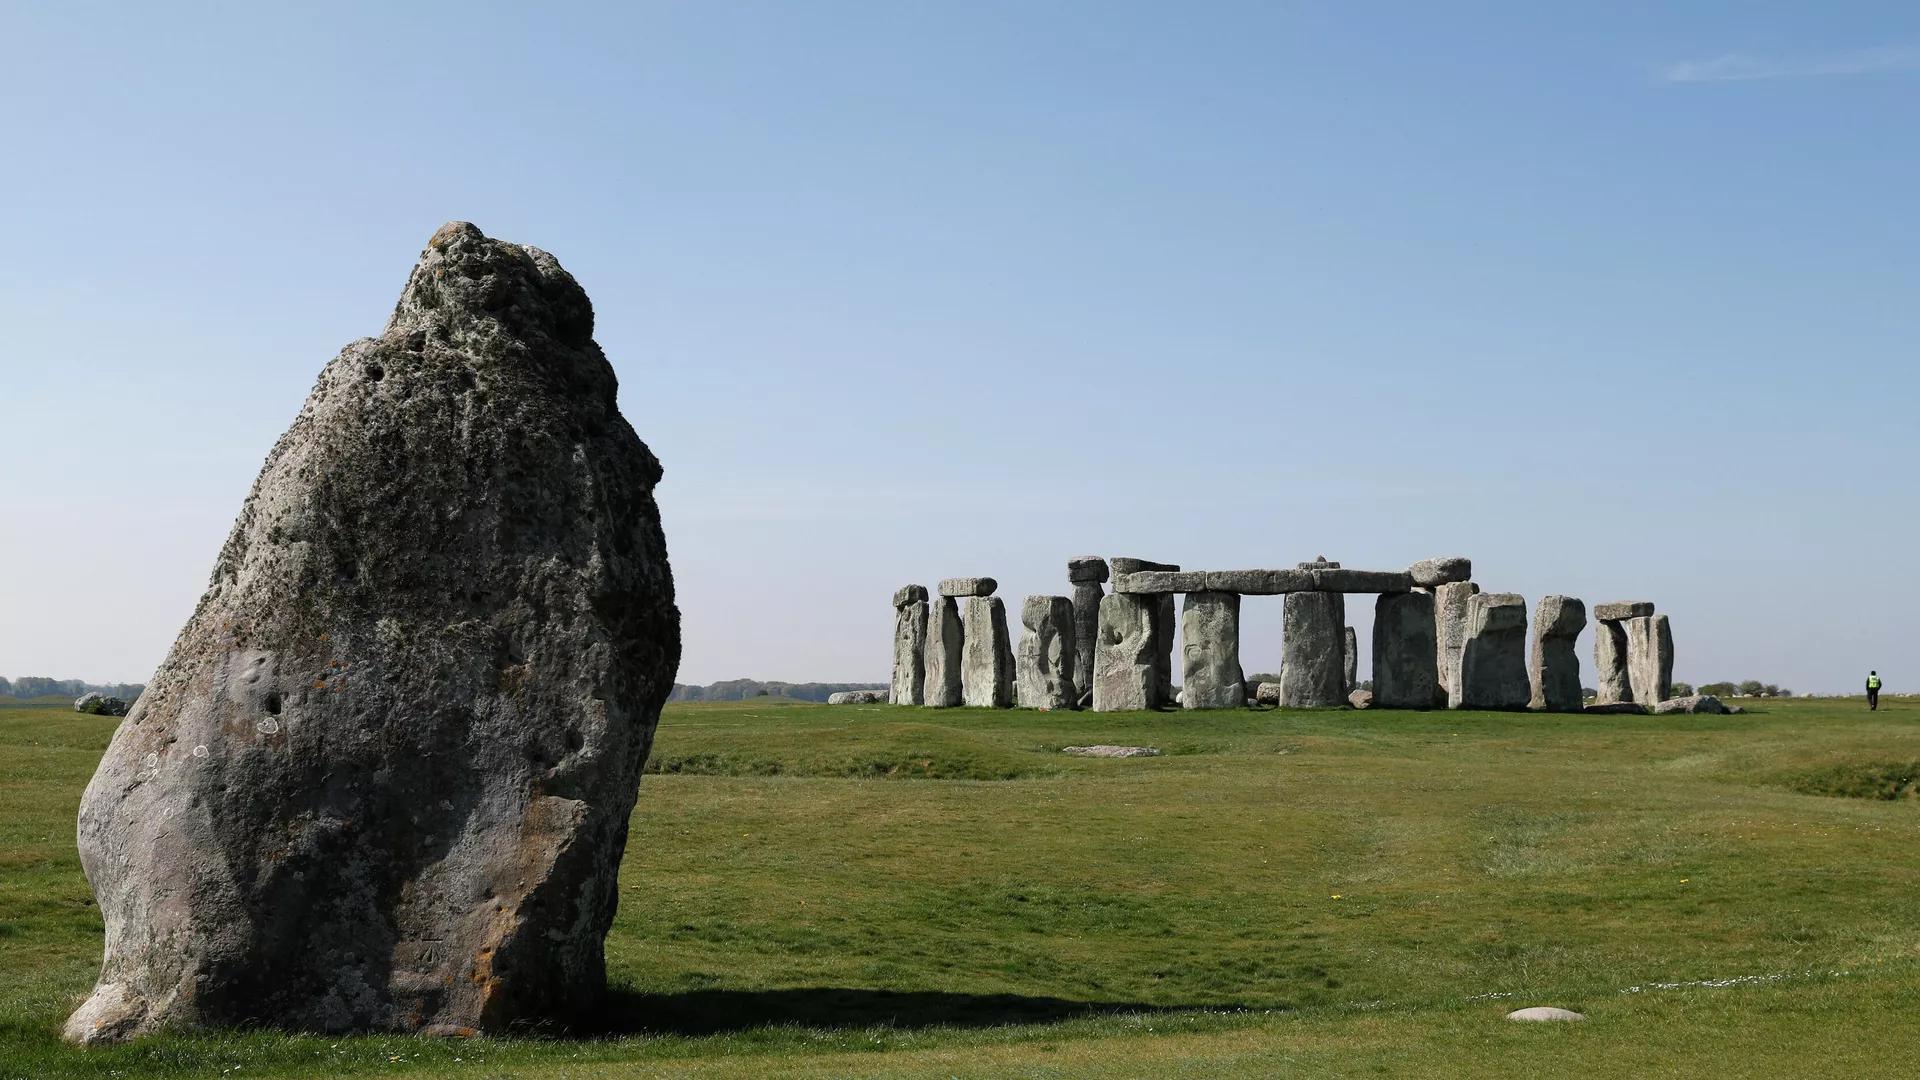 Scaffolding Spotted at Stonehenge as Iconic 4,500-Year-Old Monument Gets Repaired